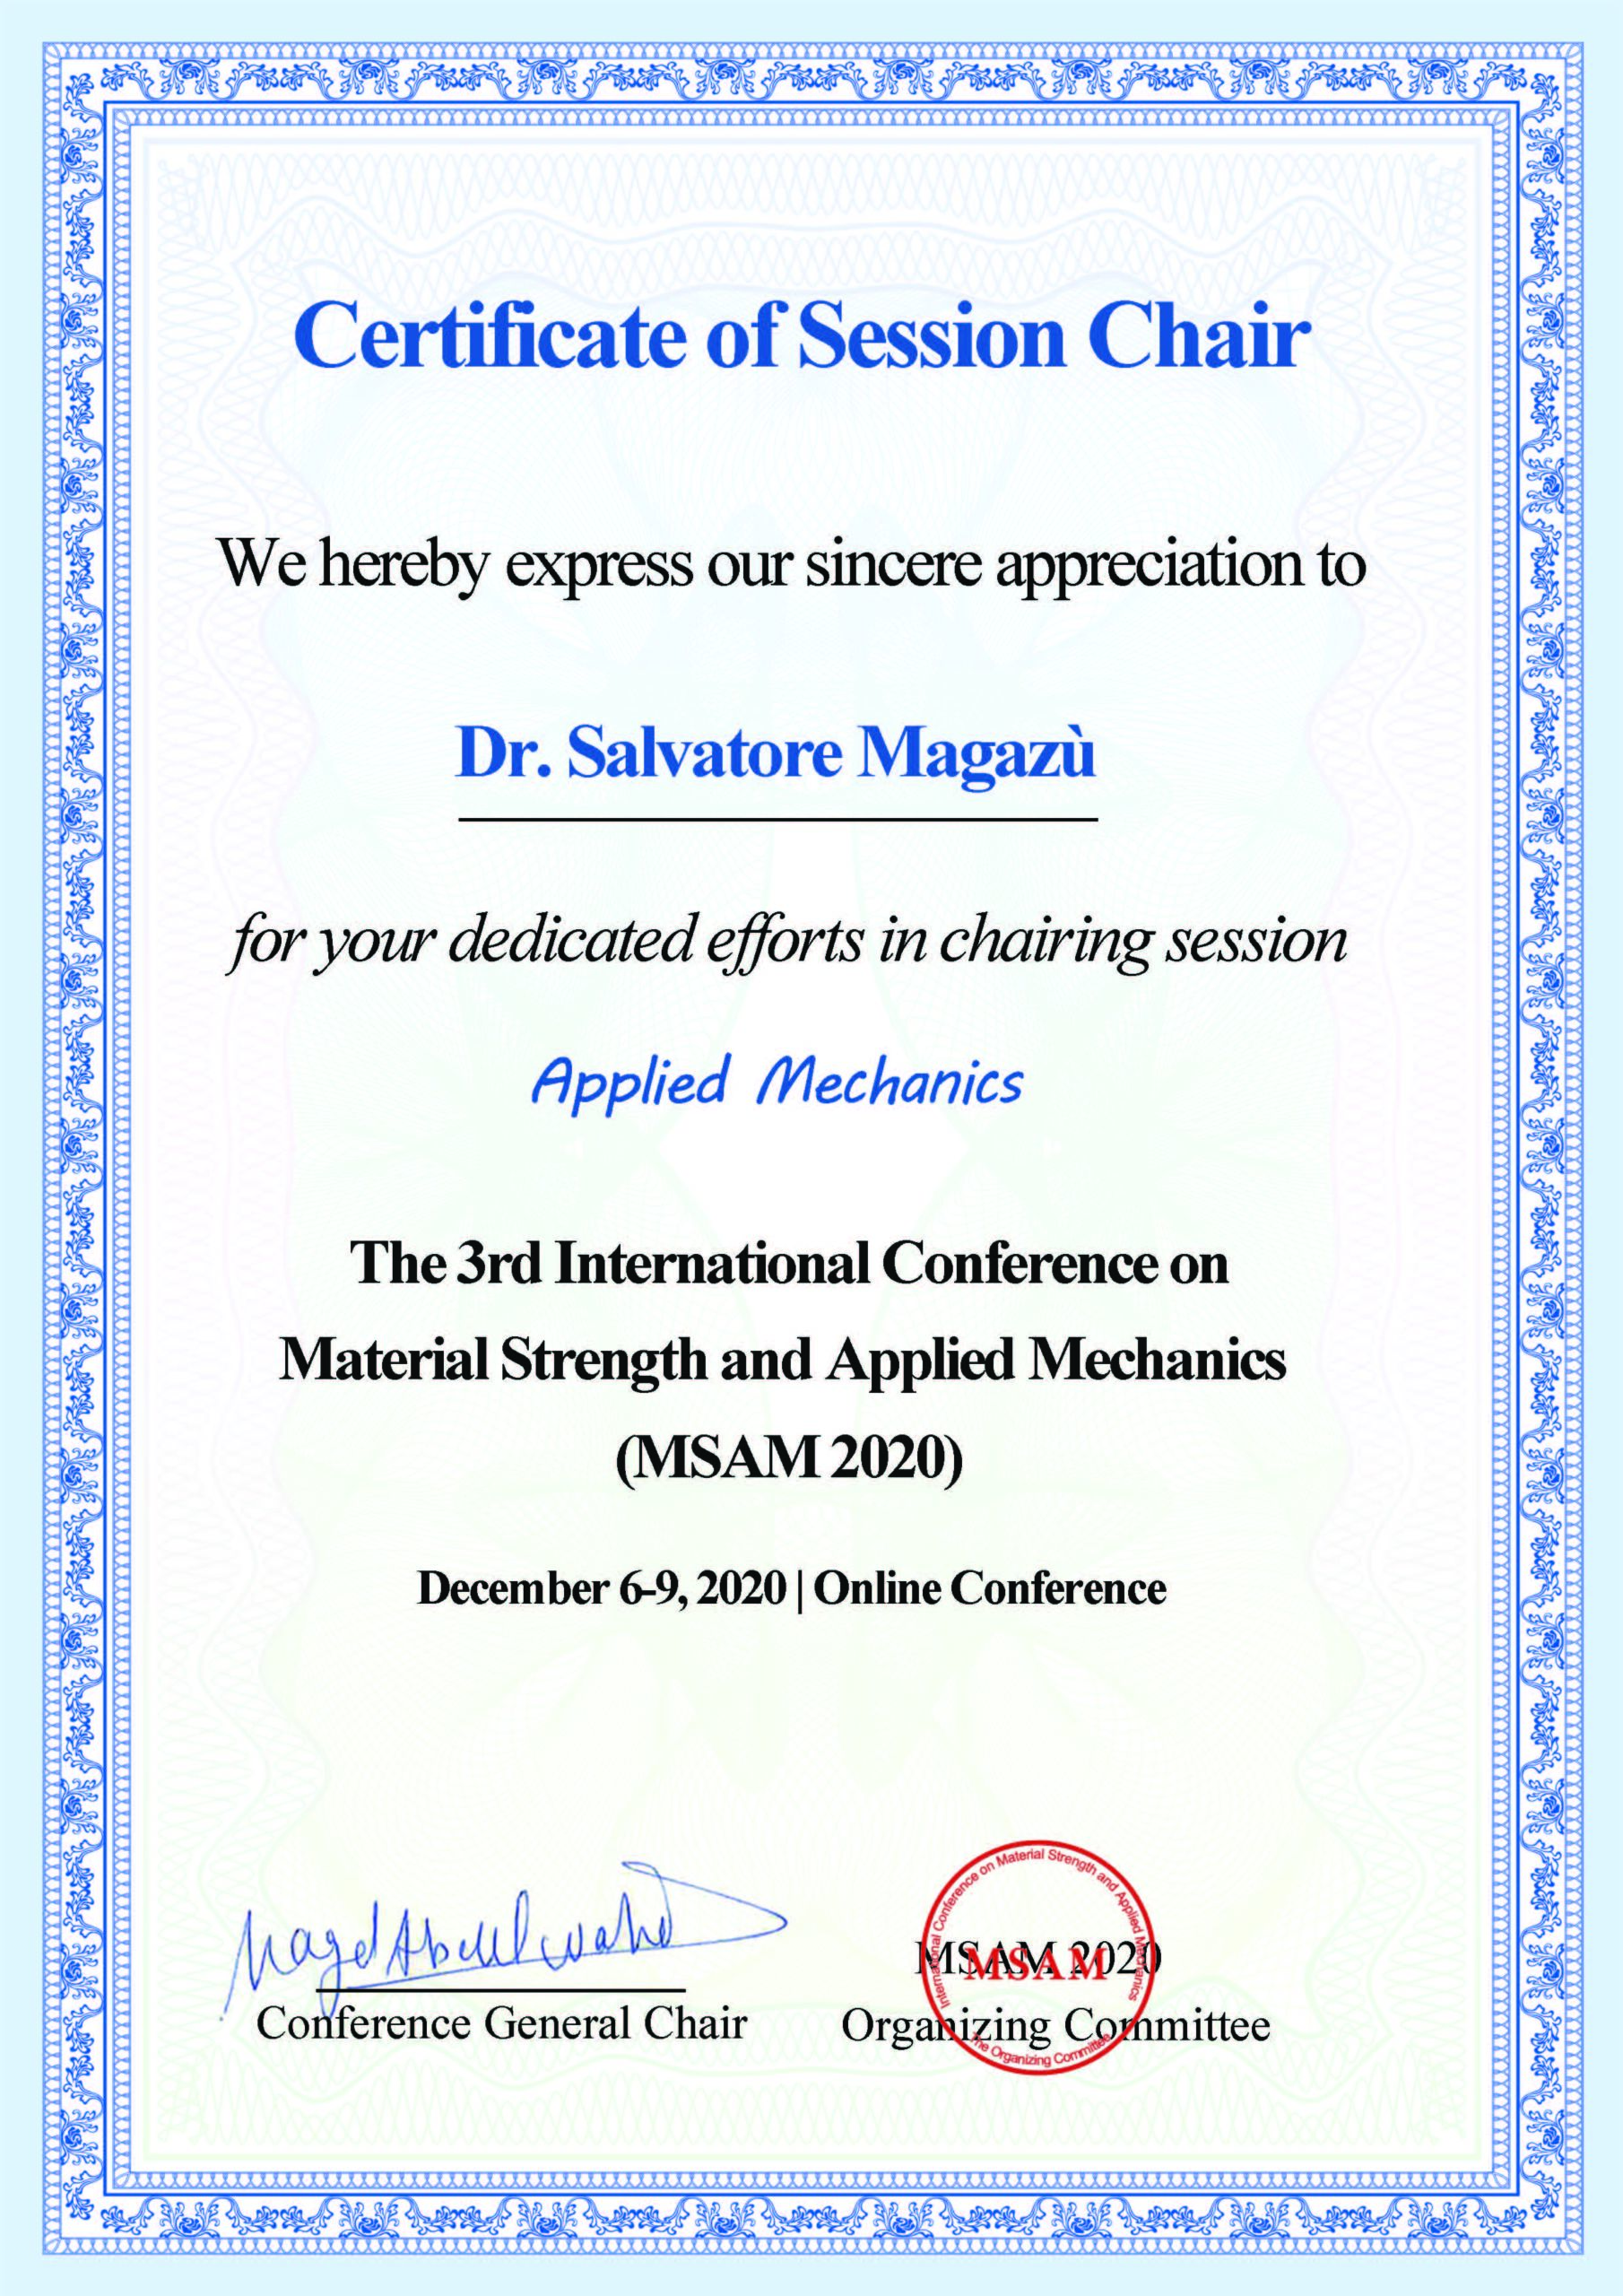 Certificate Conference on Material Strenght and Applied Mechanics